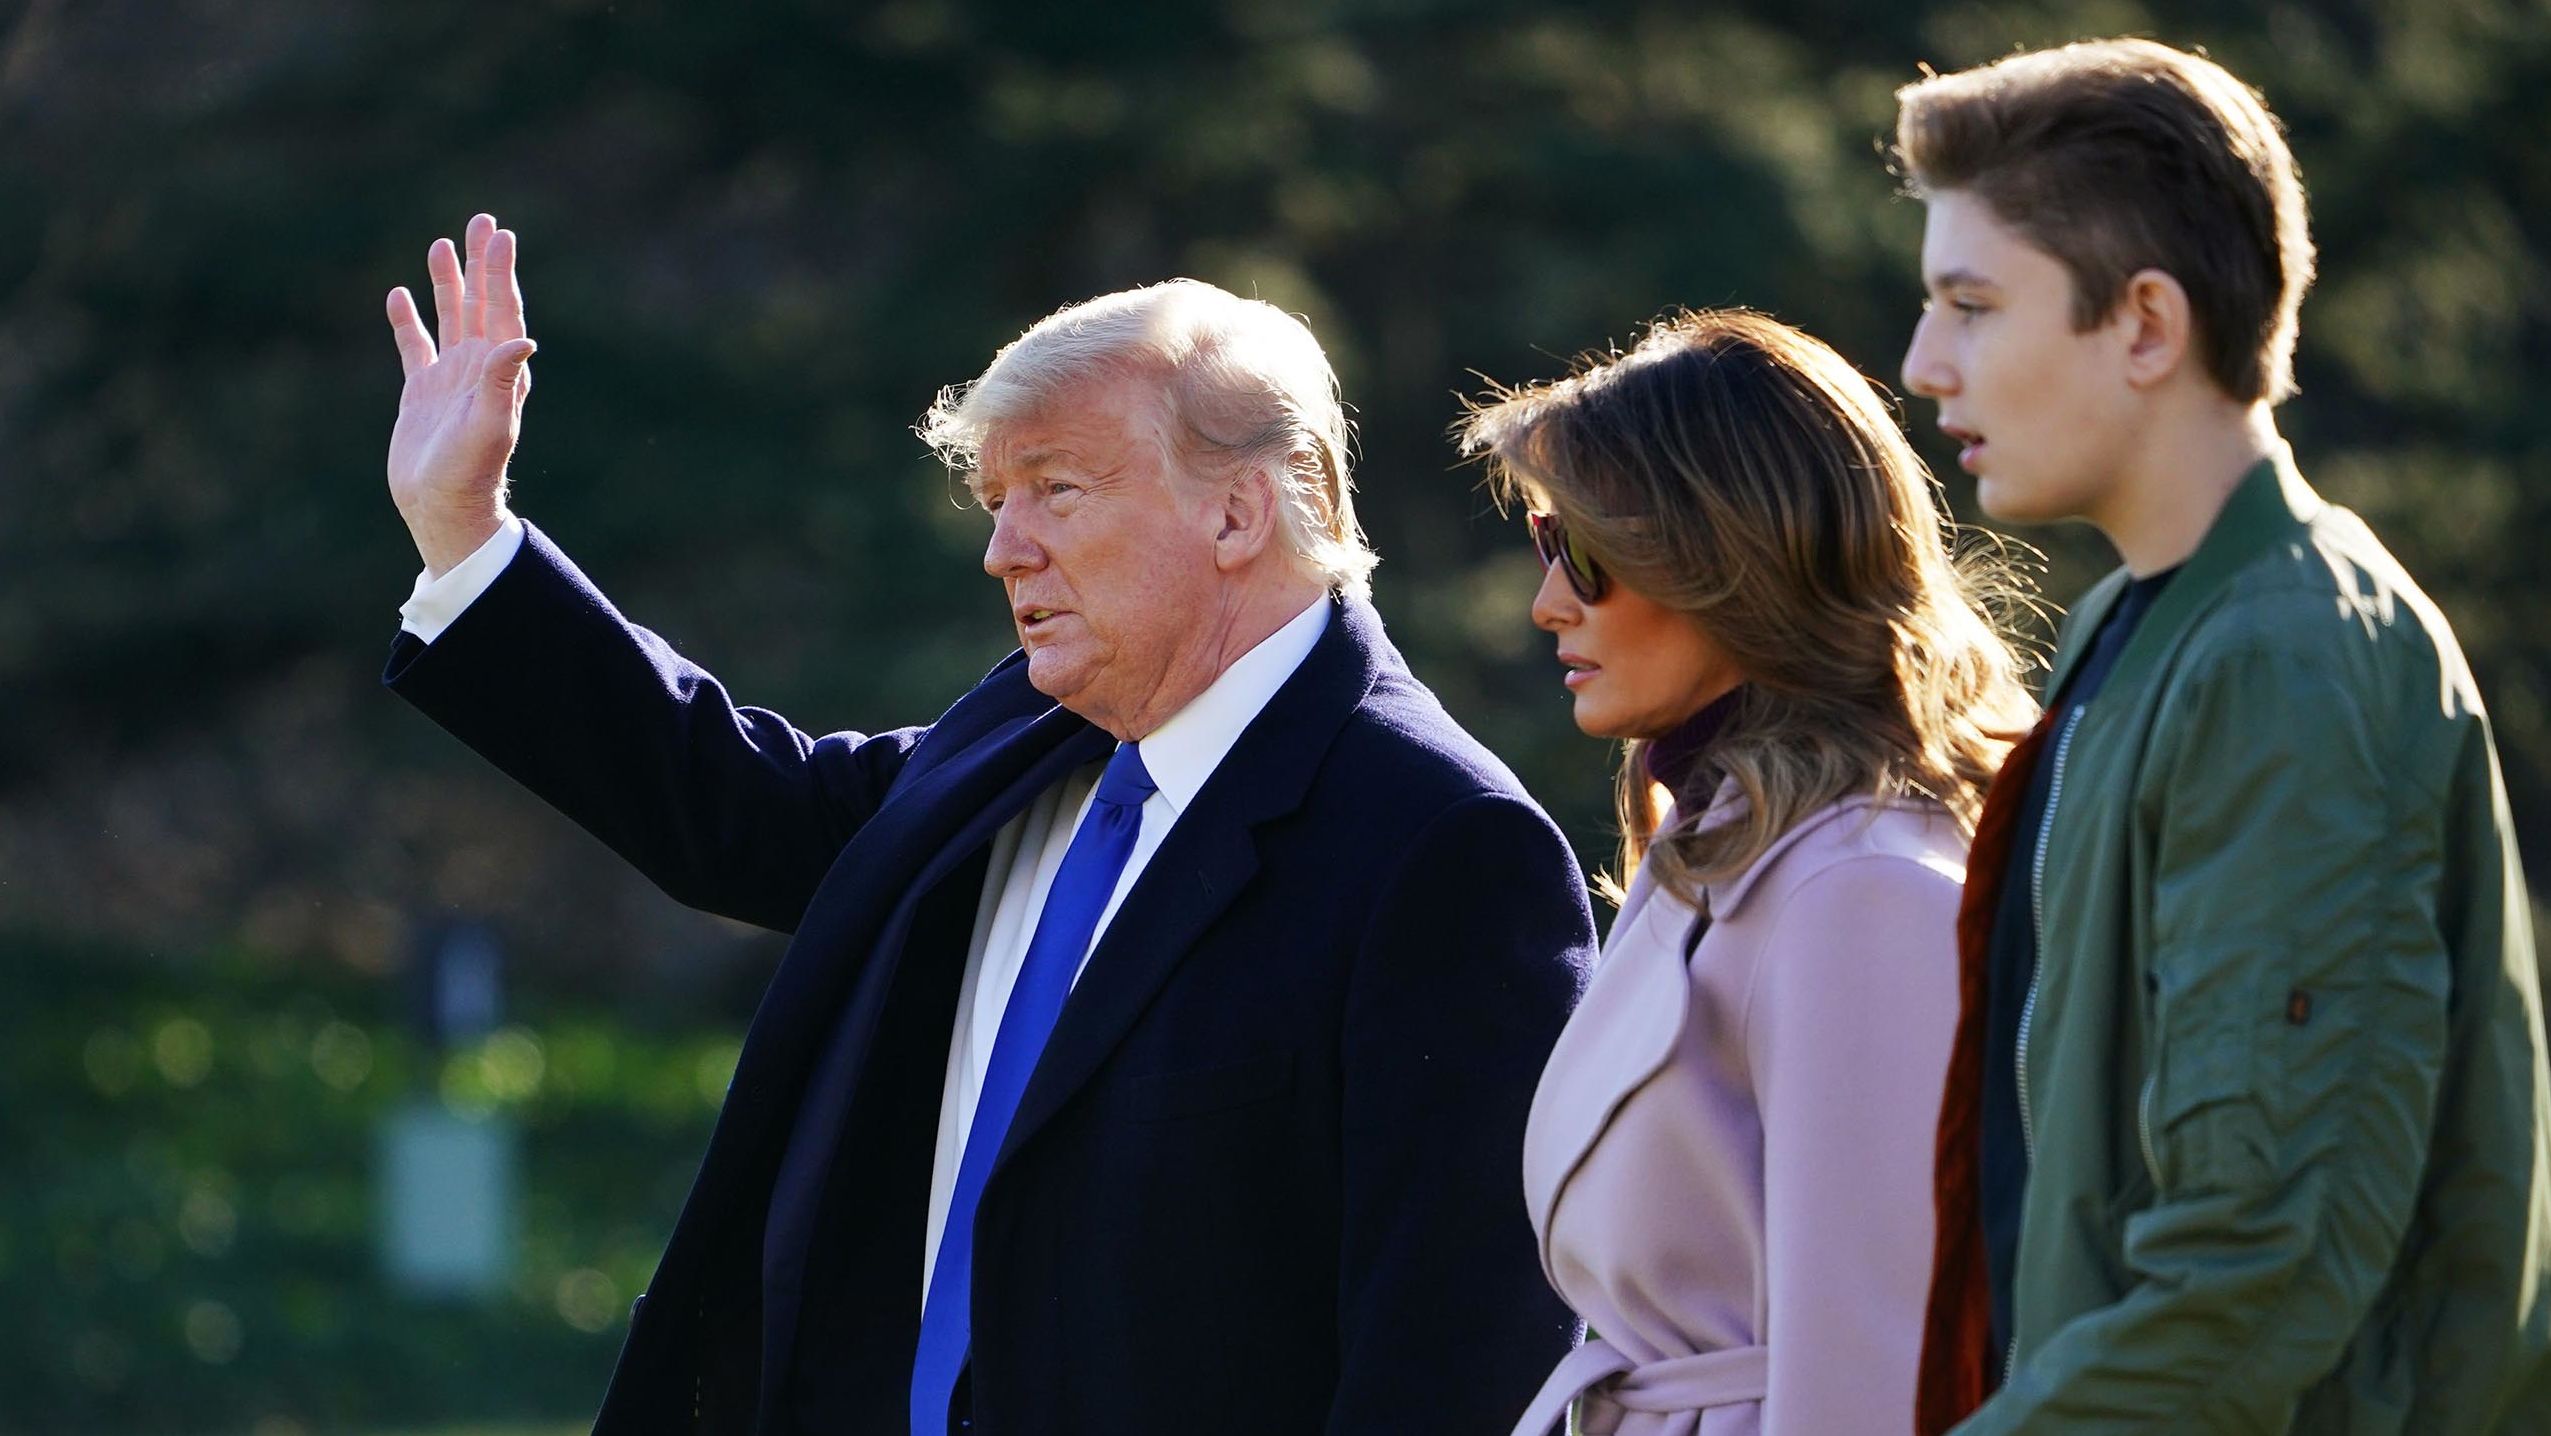 Barron Trump’s private school will begin with virtual classes only